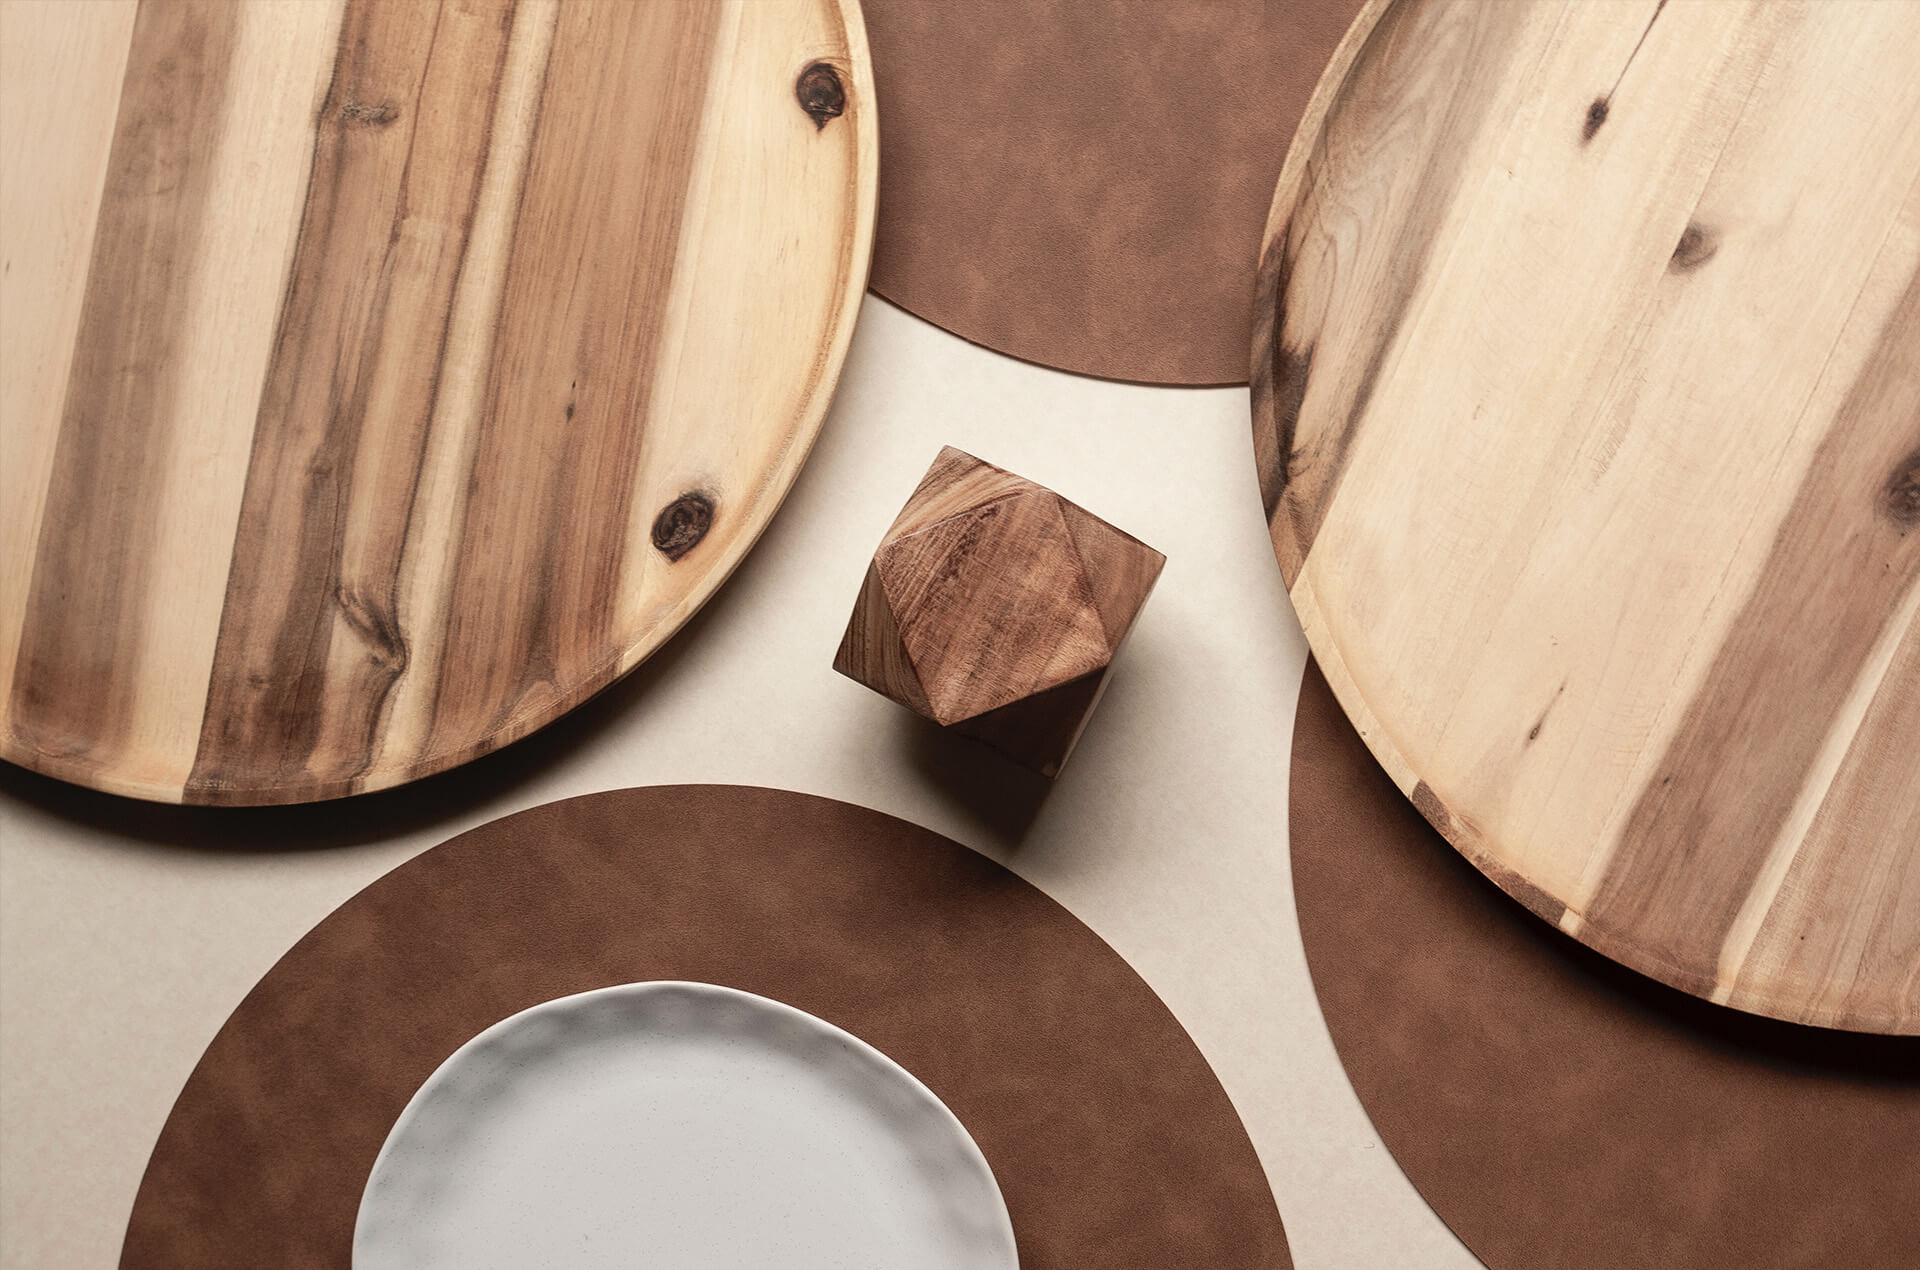 Round trays and a bowl on placemats